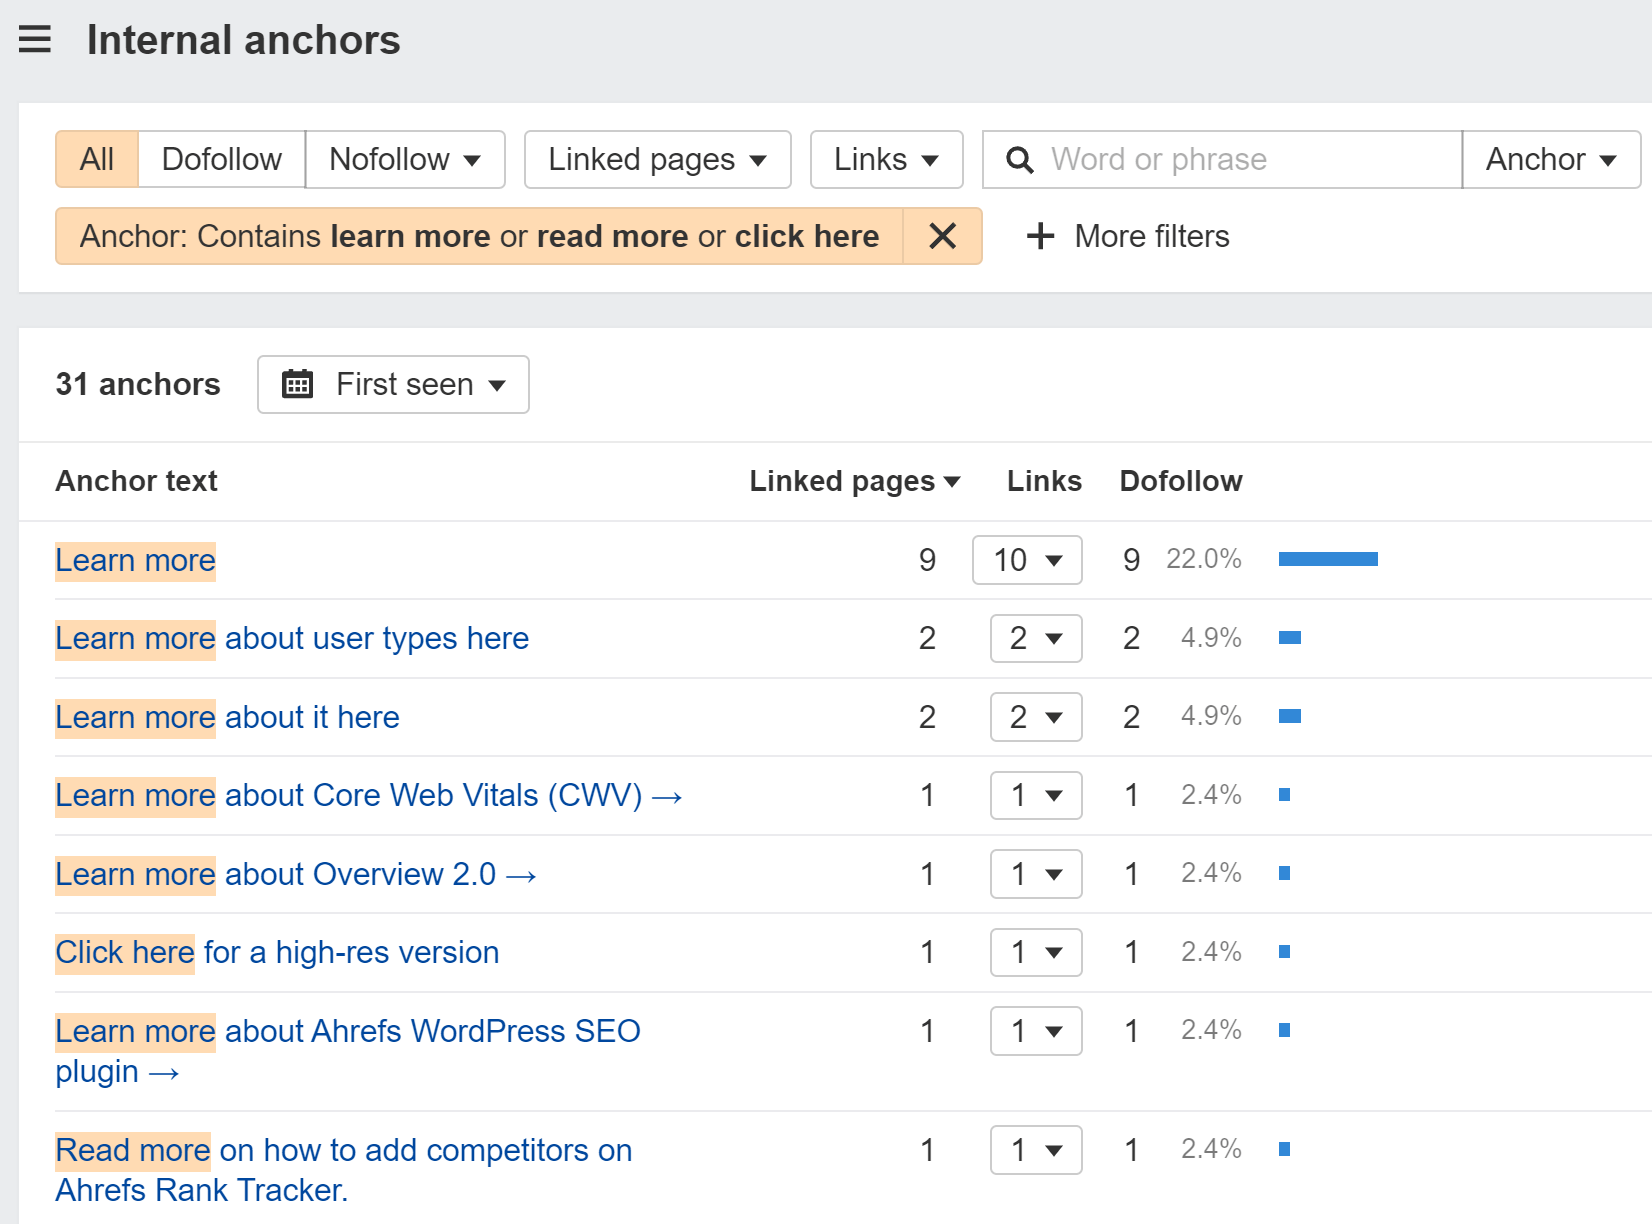 Filter for generic anchor text that shows link text you should improve